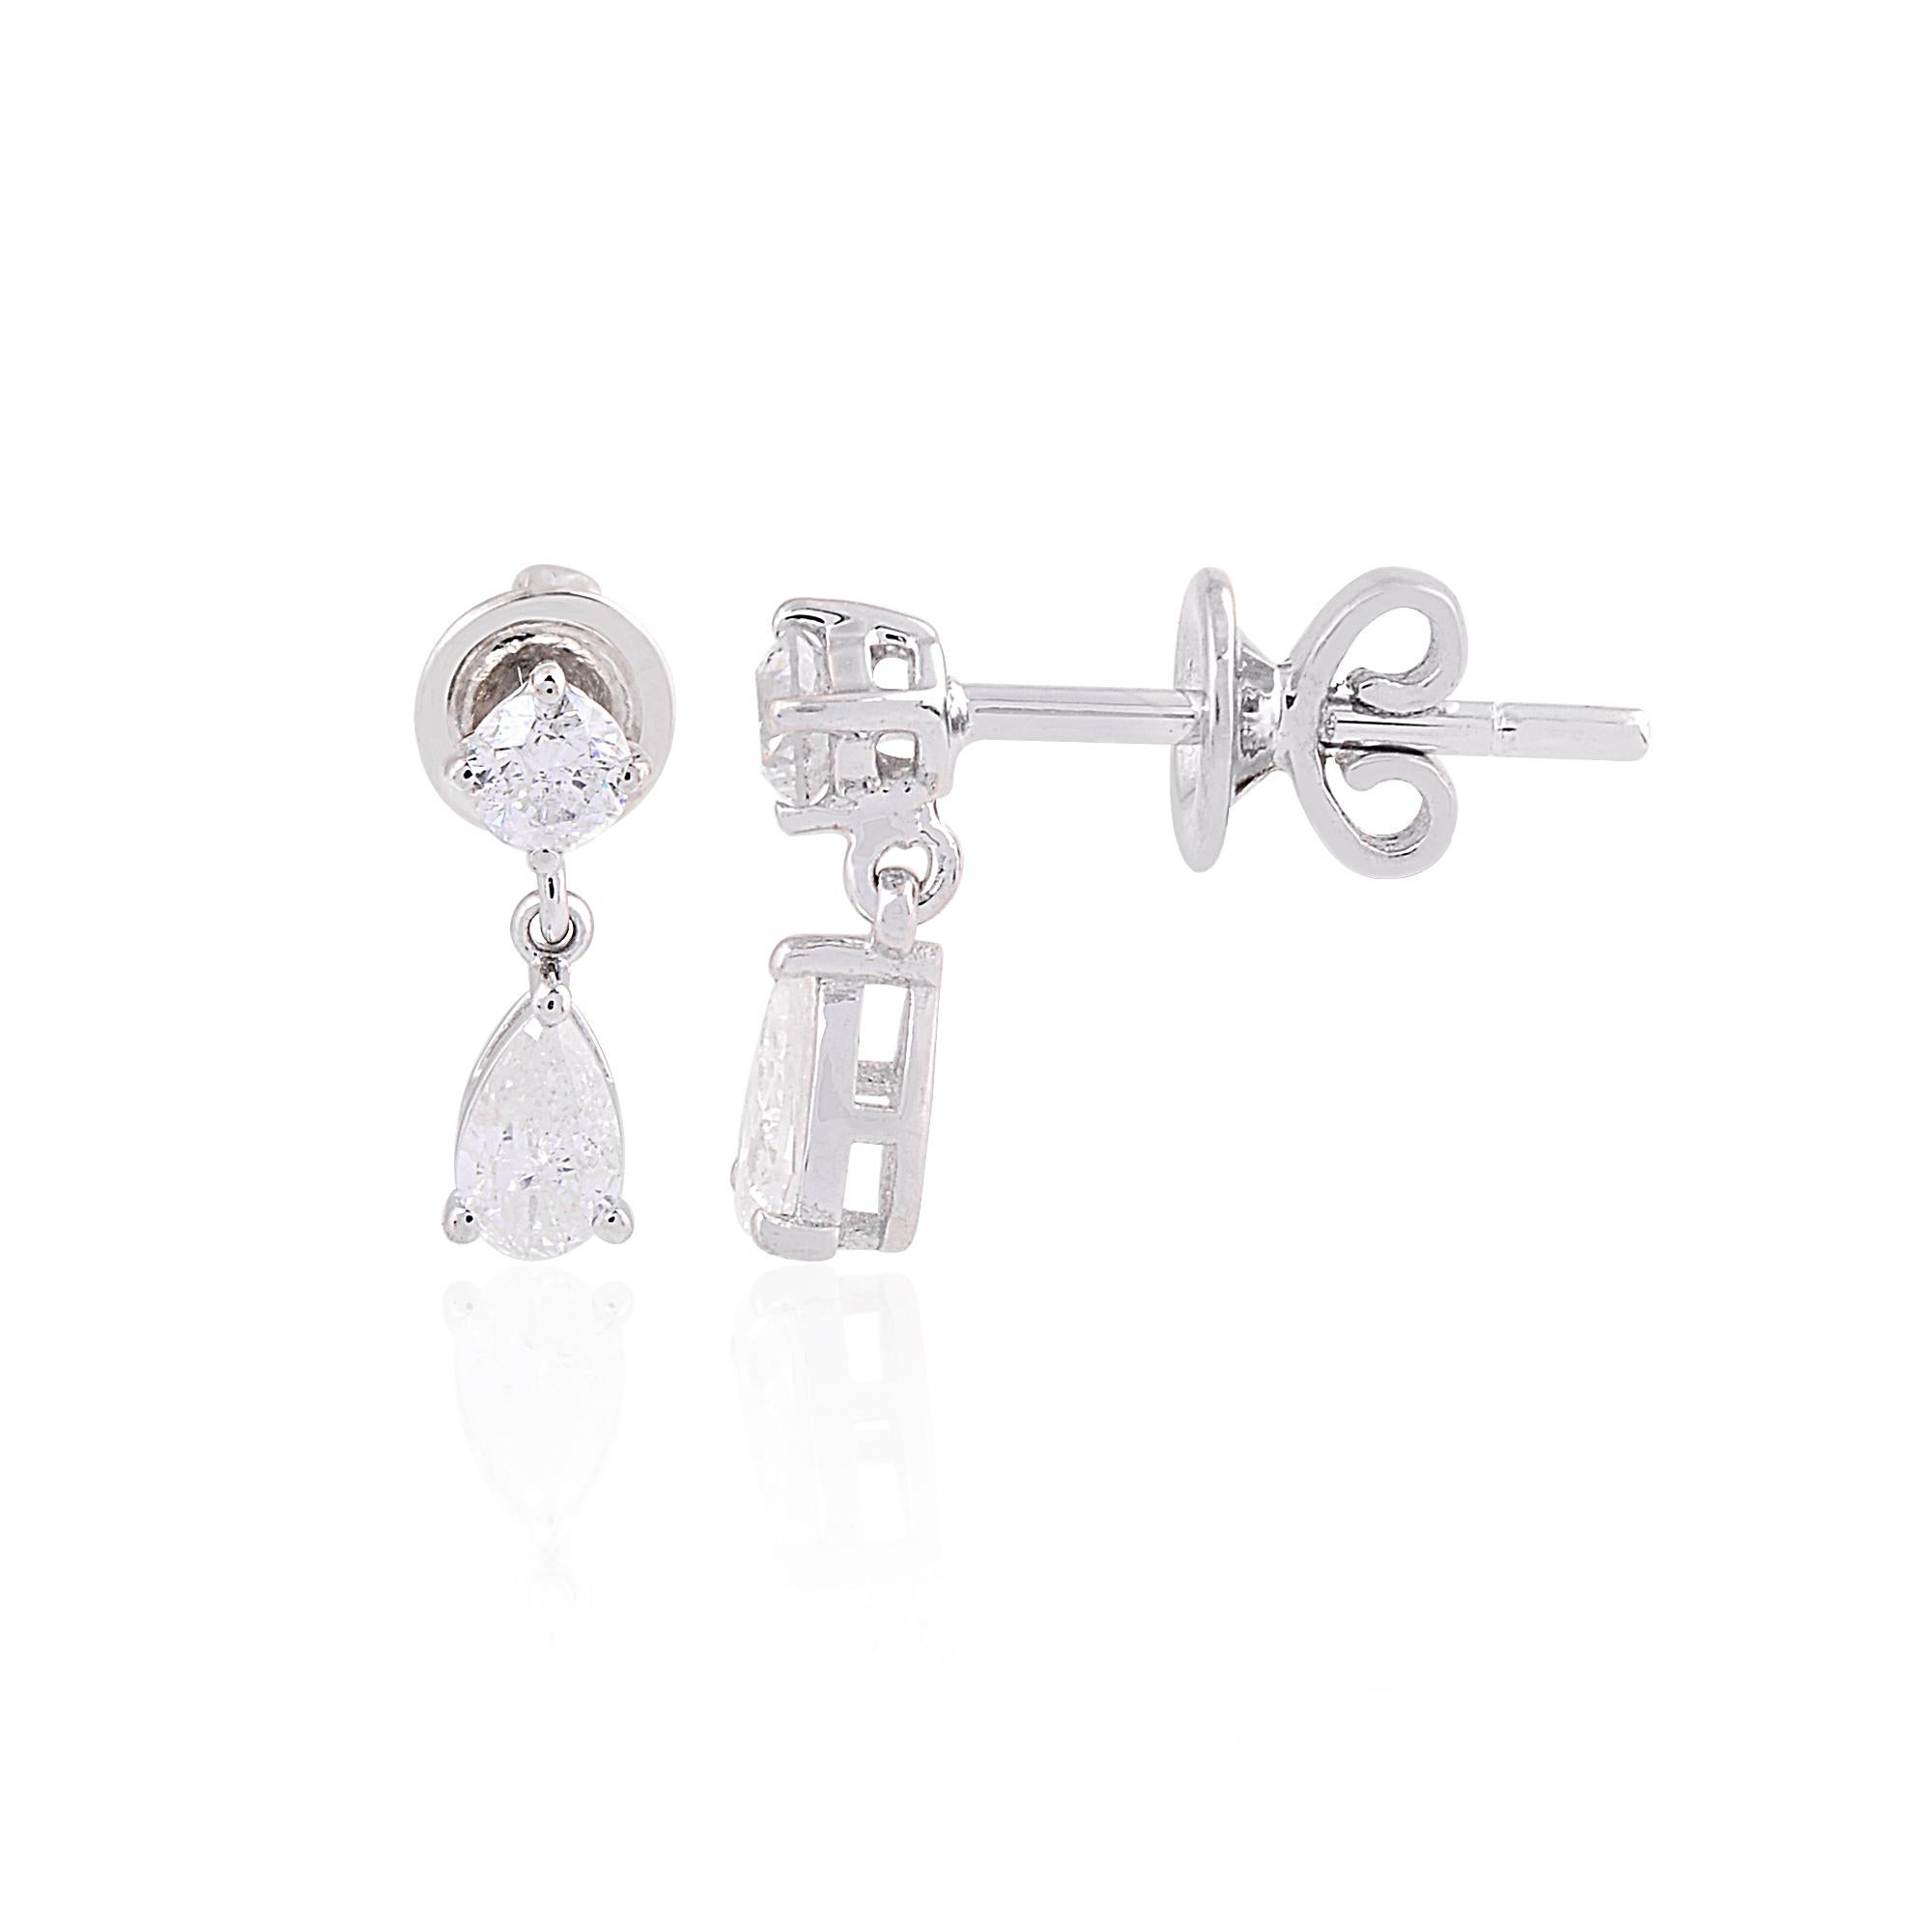 Item Code :- SEE-1519D
Gross Weight :- 1.82 gm
18k Solid White Gold Weight :- 1.69 gm
Natural Diamond Weight :- 0.65 Carat  ( AVERAGE DIAMOND CLARITY SI1-SI2 & COLOR H-I )
Earrings Length :- 12 mm approx.

✦ Sizing
.....................
We can